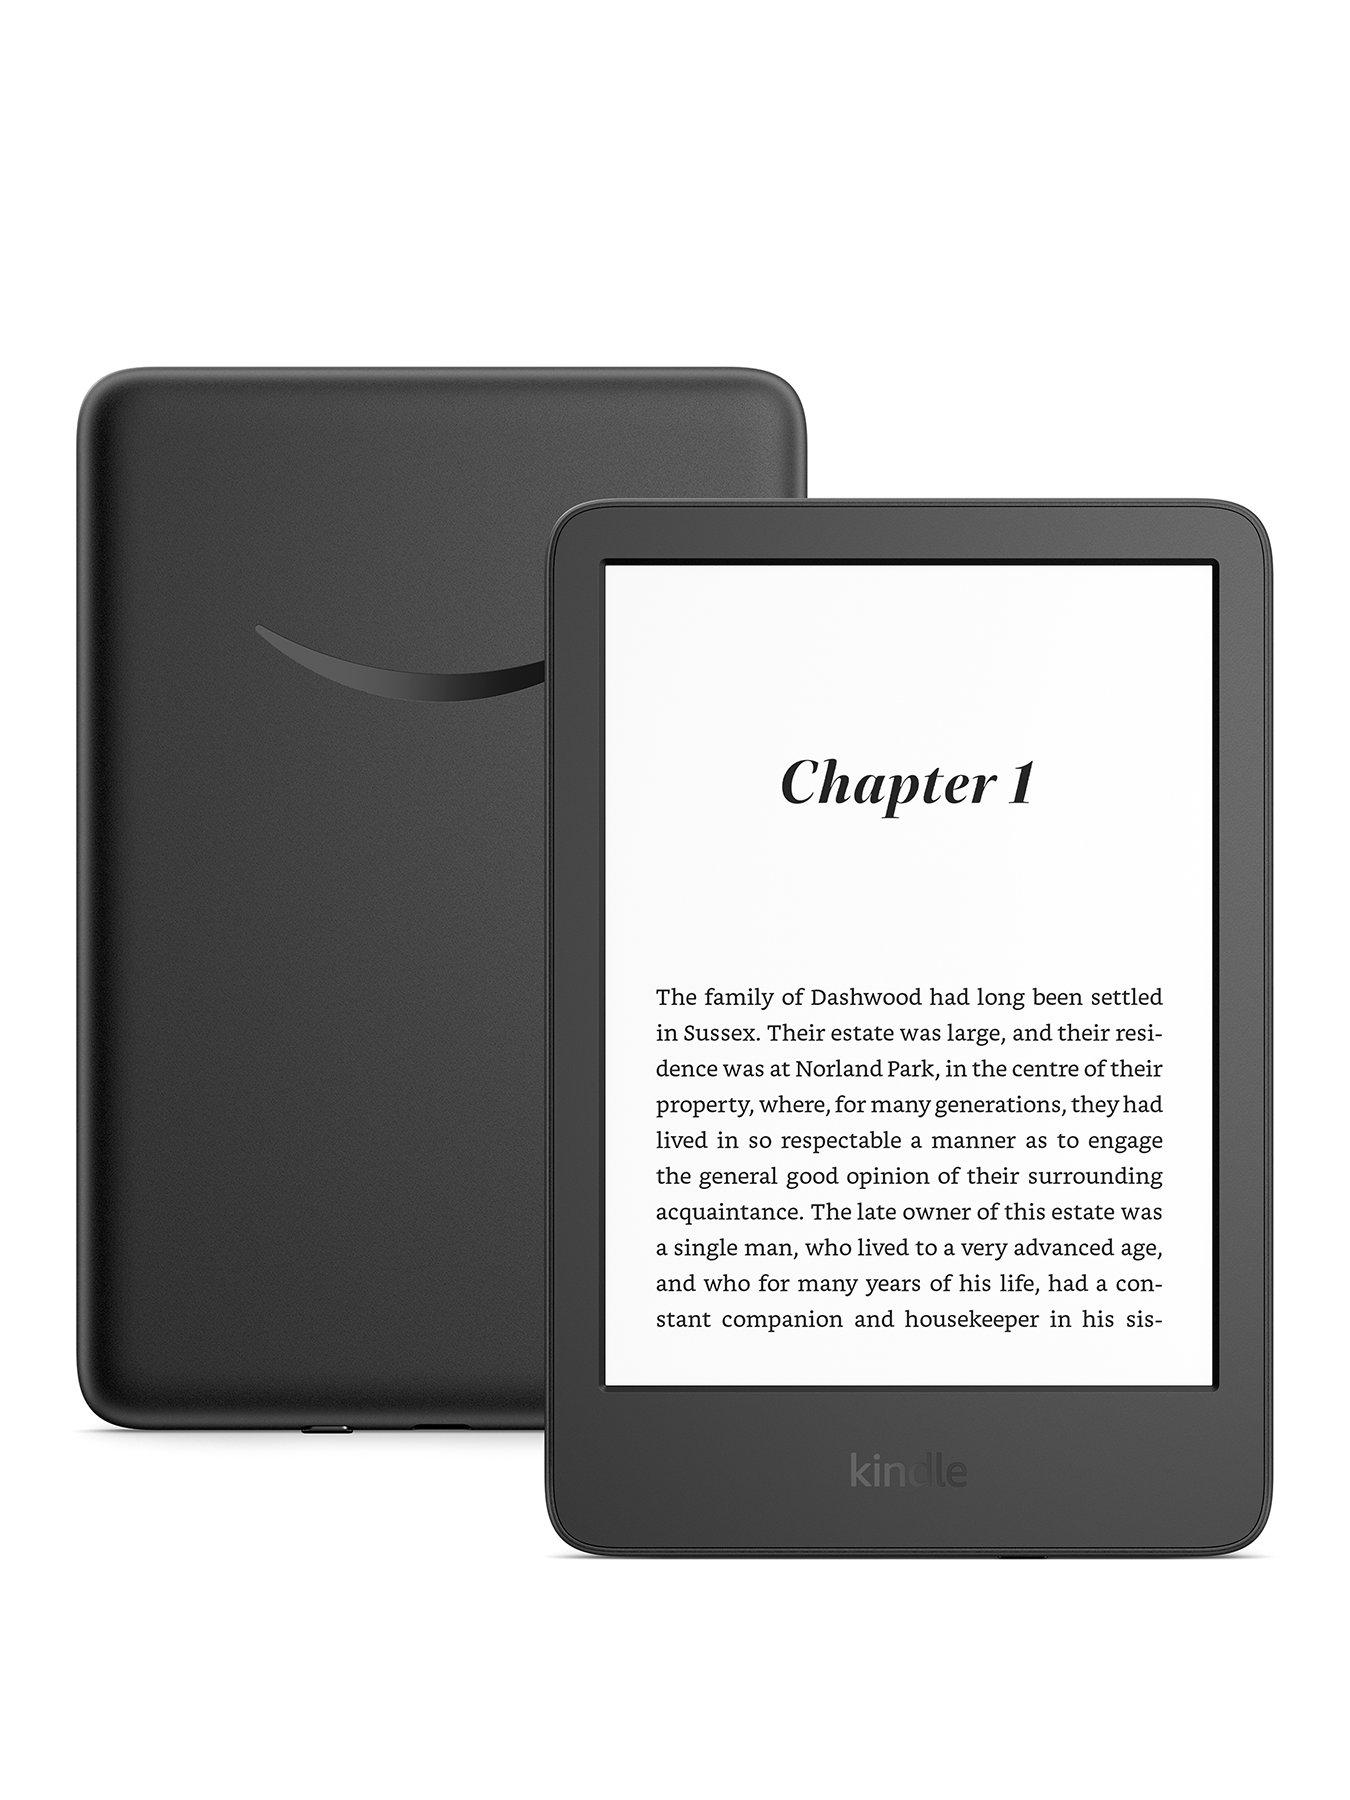 Amazon Kindle (2022 release) with ads, Black